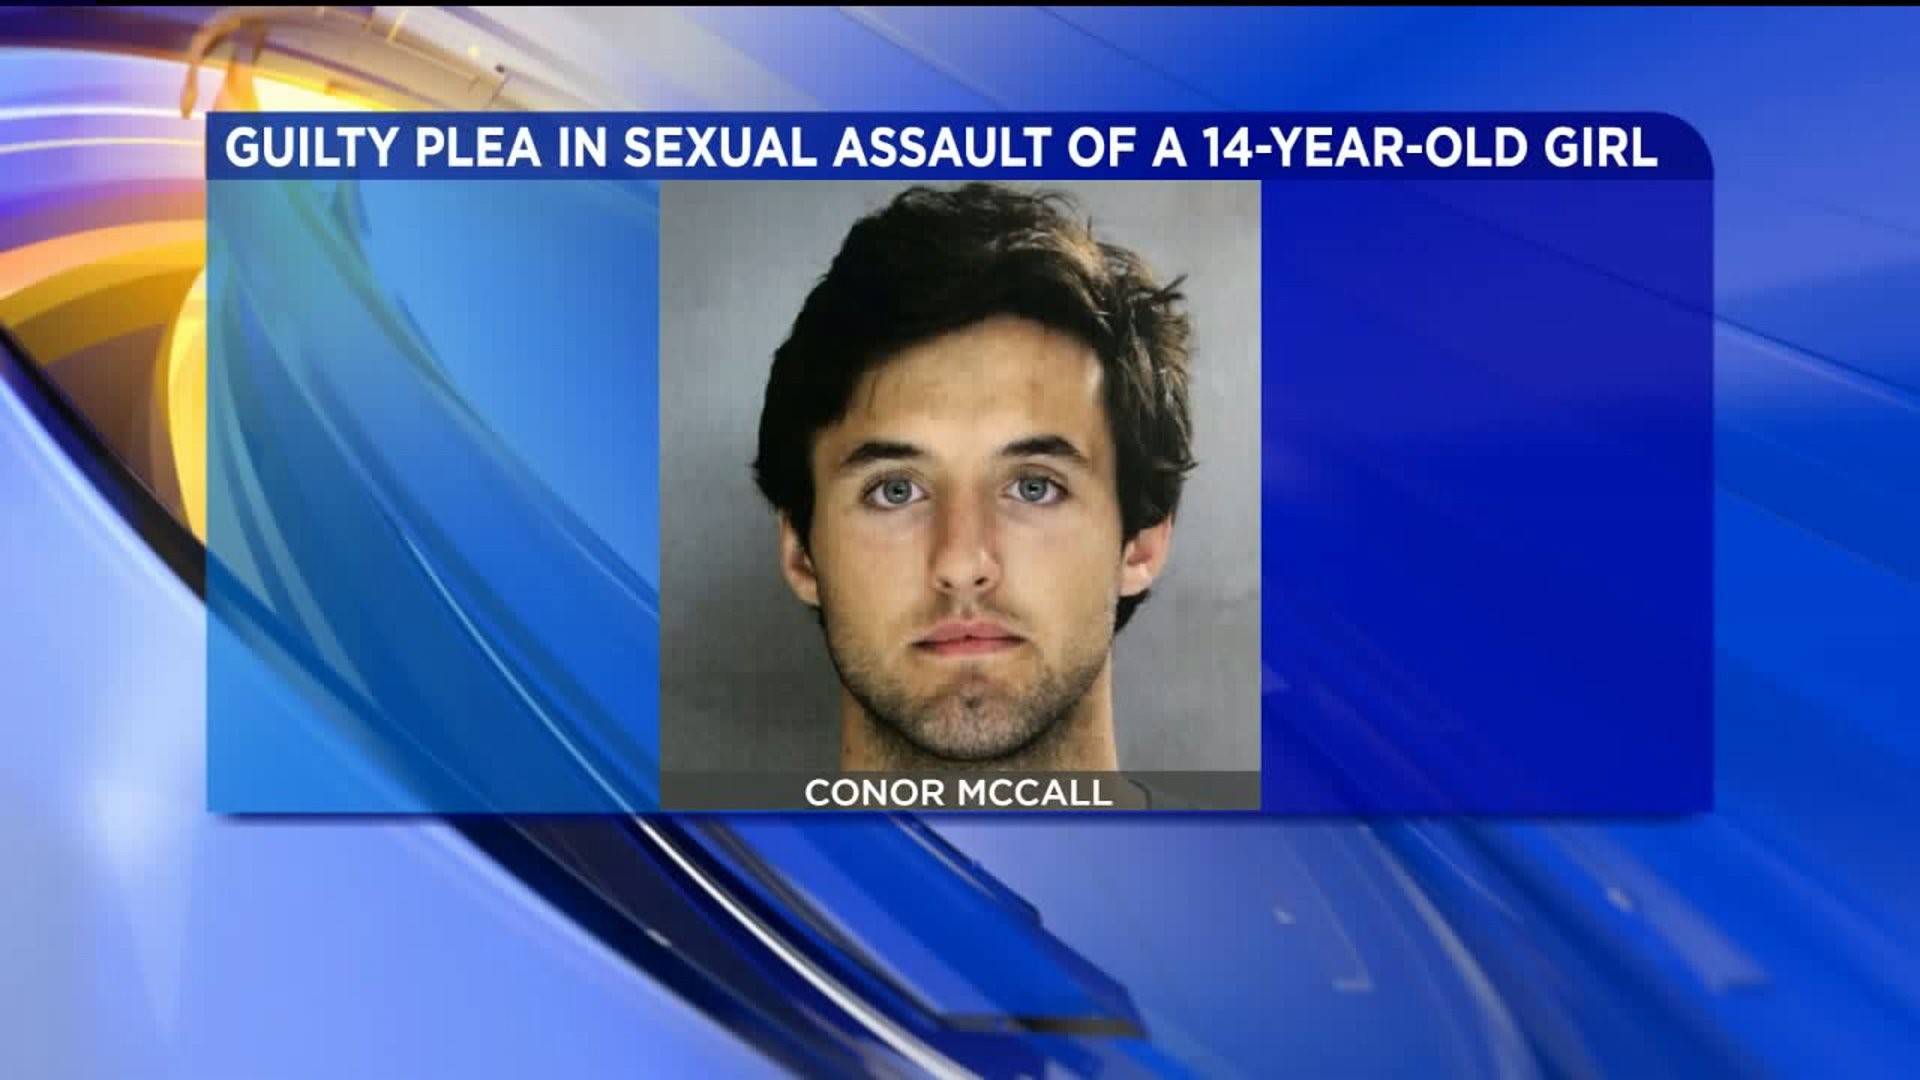 Man Pleads Guilty to Statutory Sexual Assault